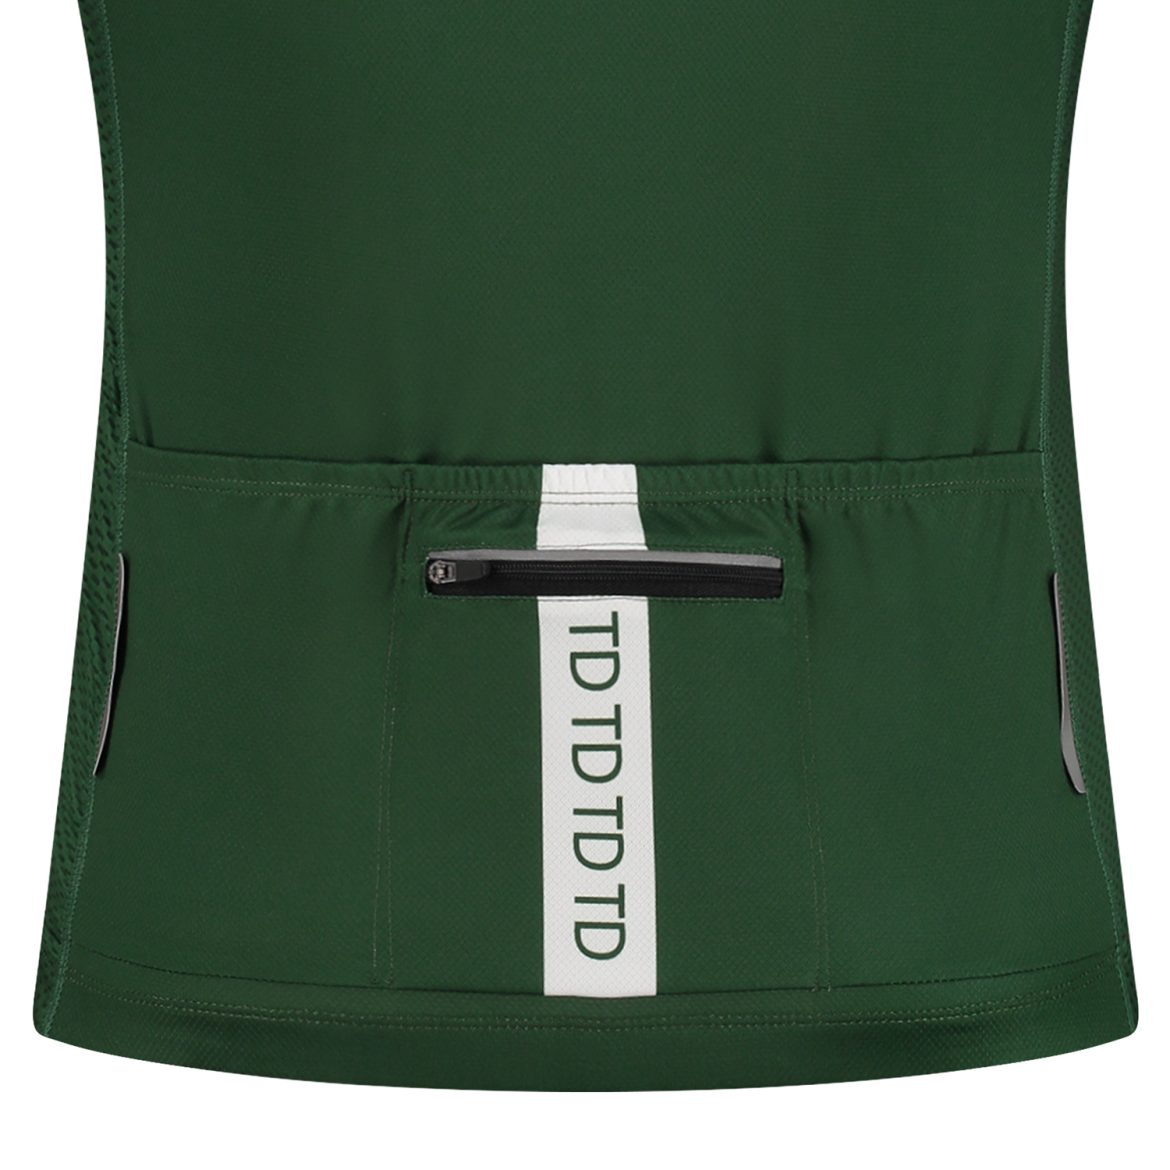 detail photo green cycling jersey back pockets with zipper for valuables from TD